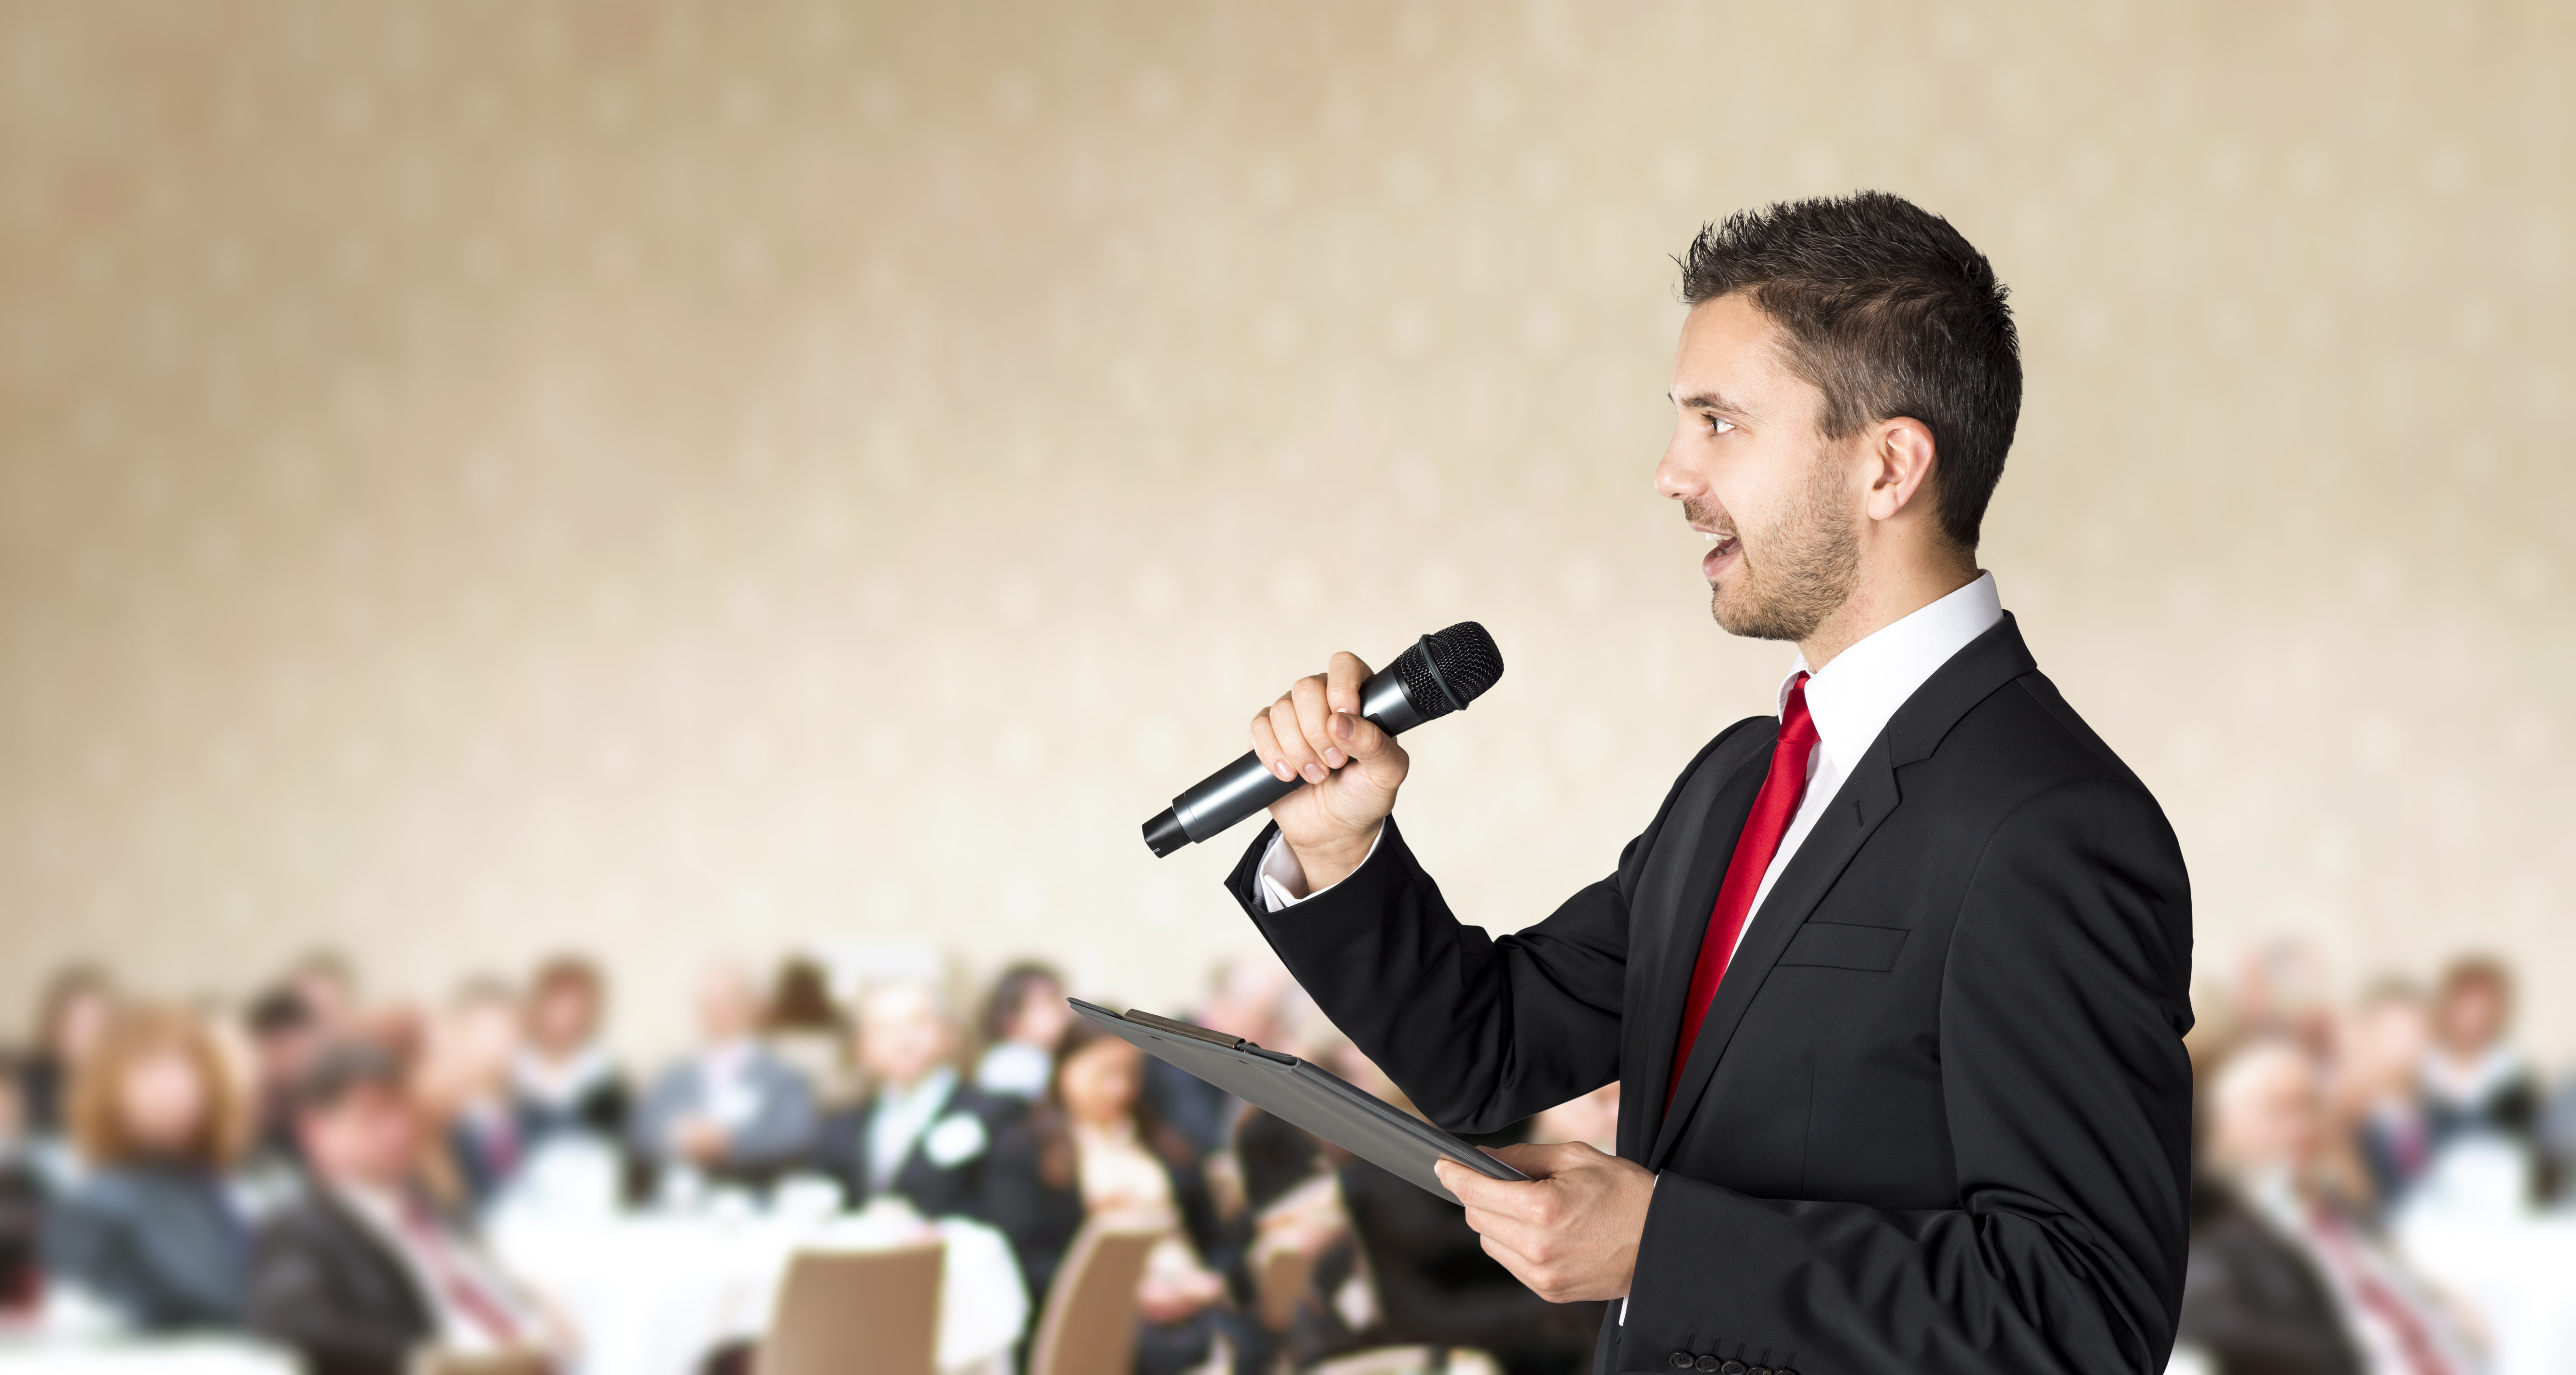 graphicstock-man-is-speaking-on-indoor-business-conference-for-manager